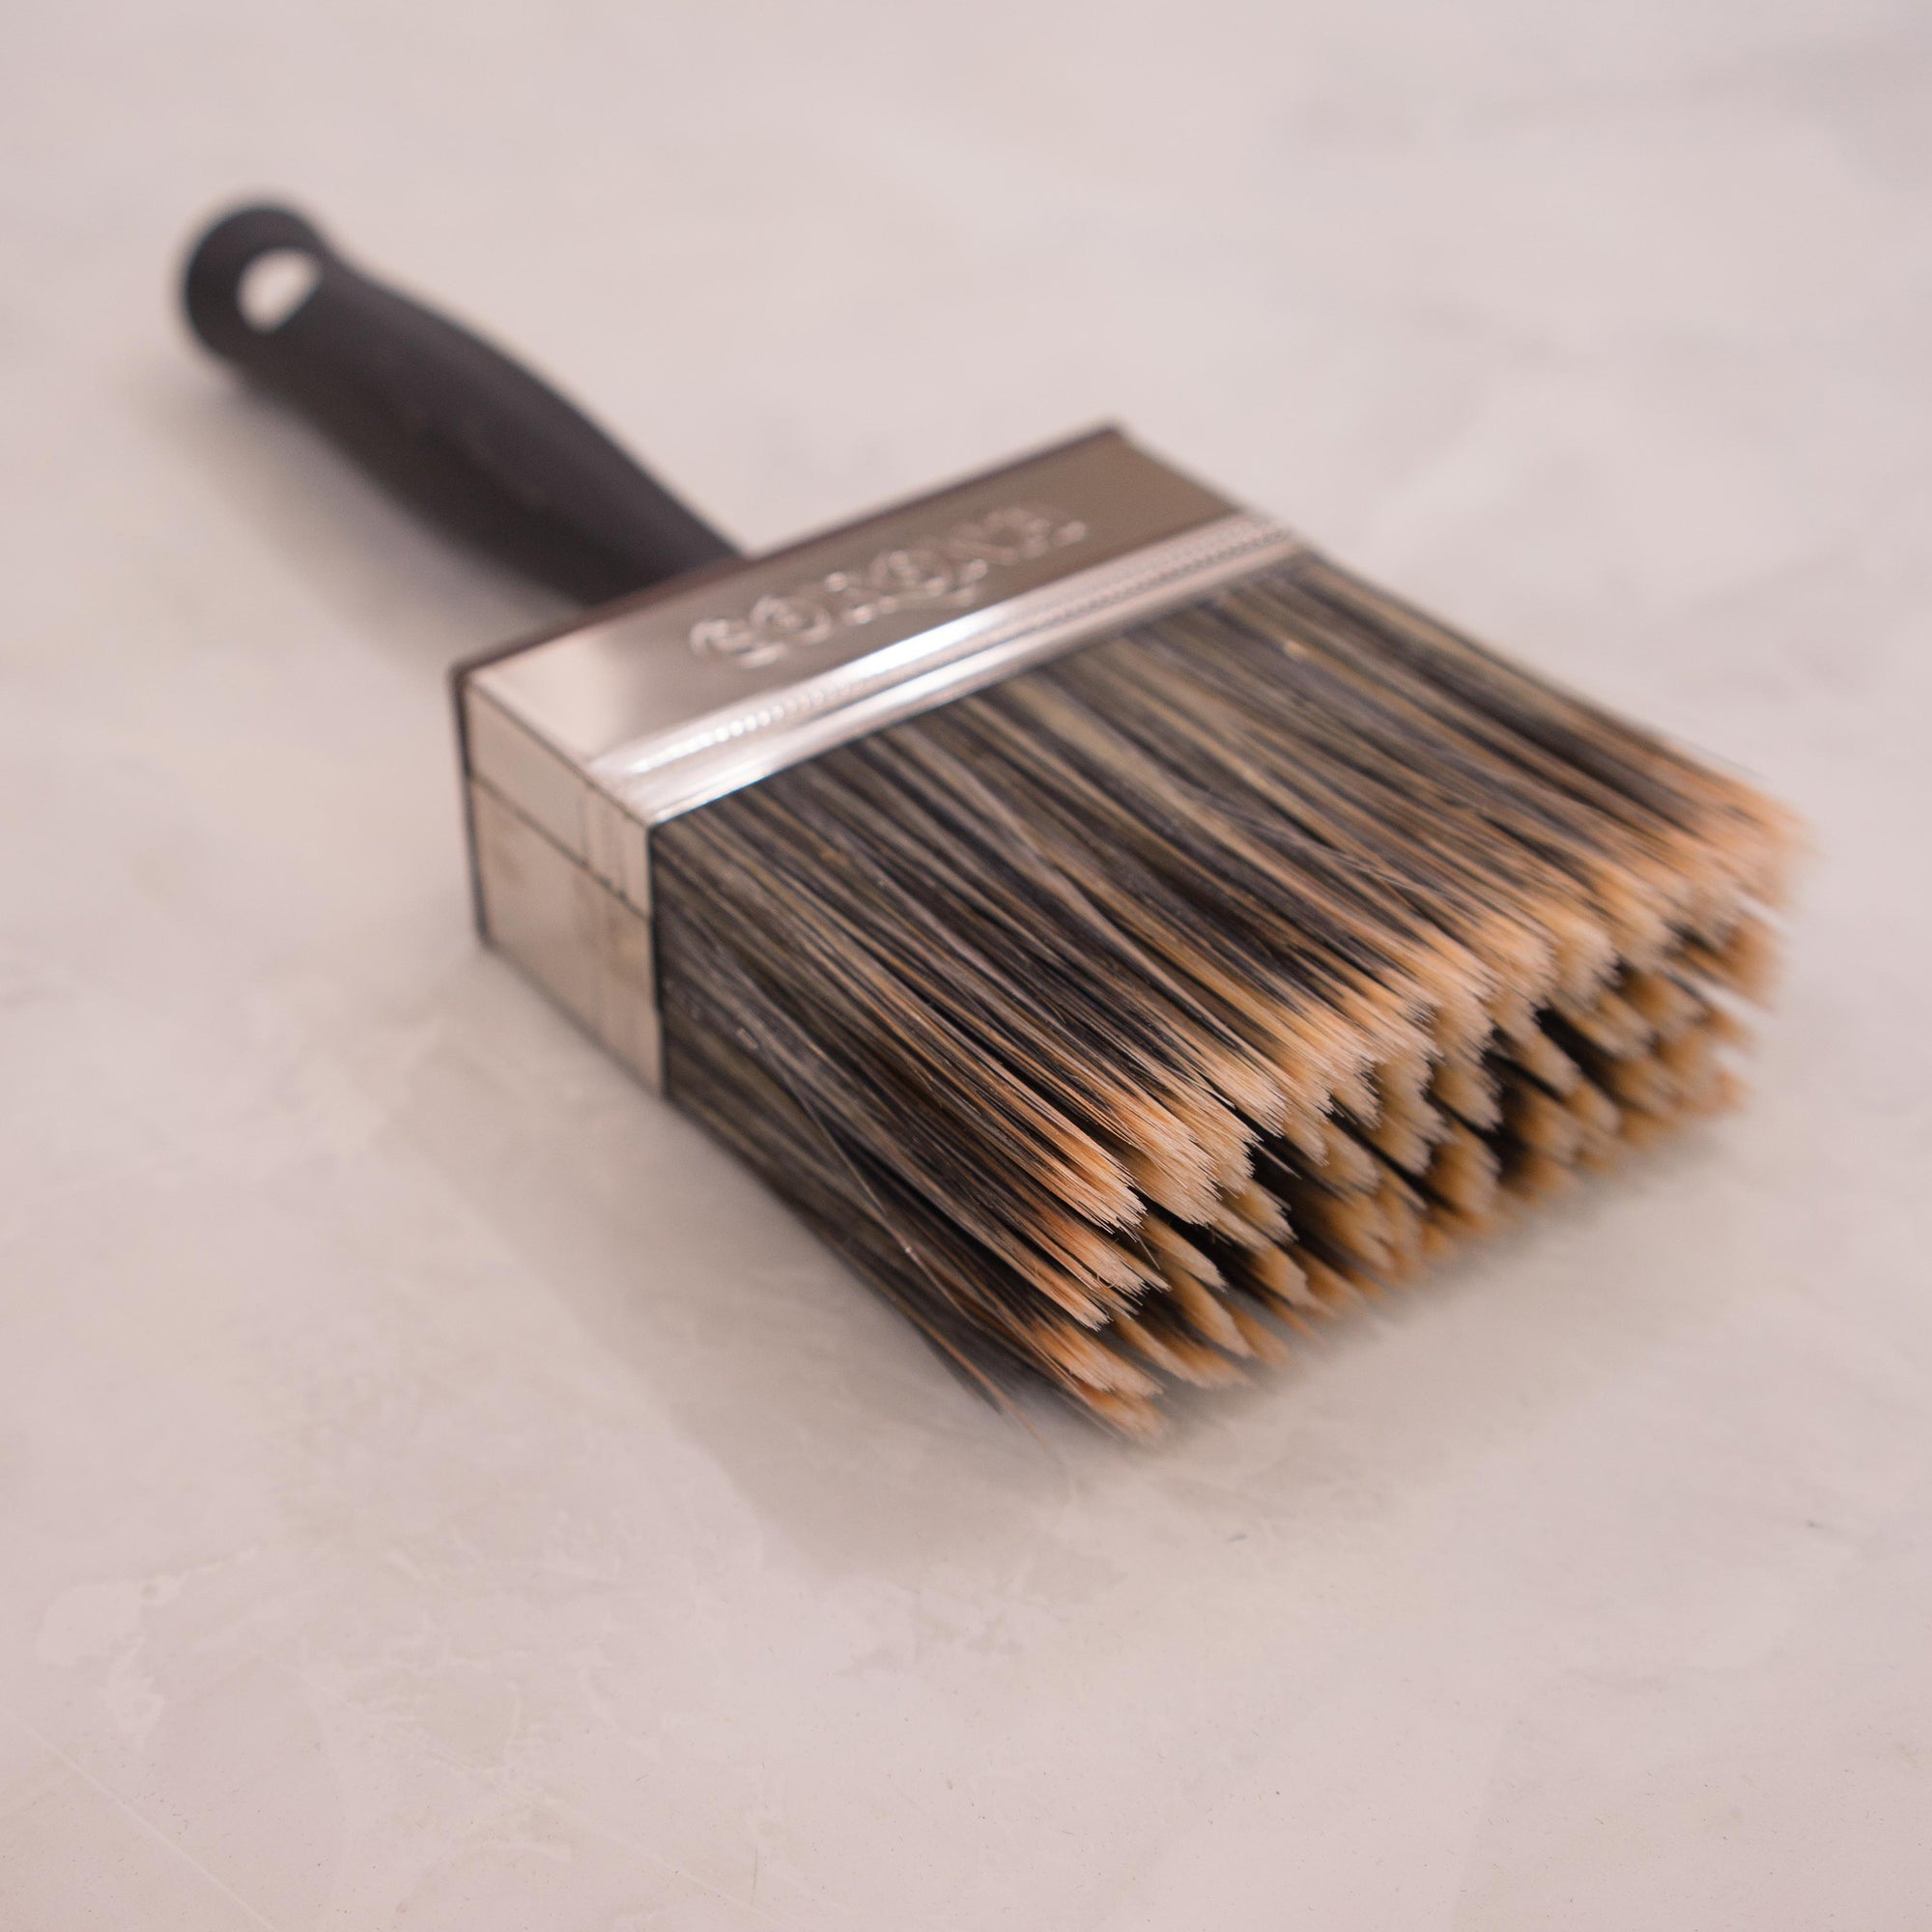 The Truth Behind GW's New $25 Paint Brushes?